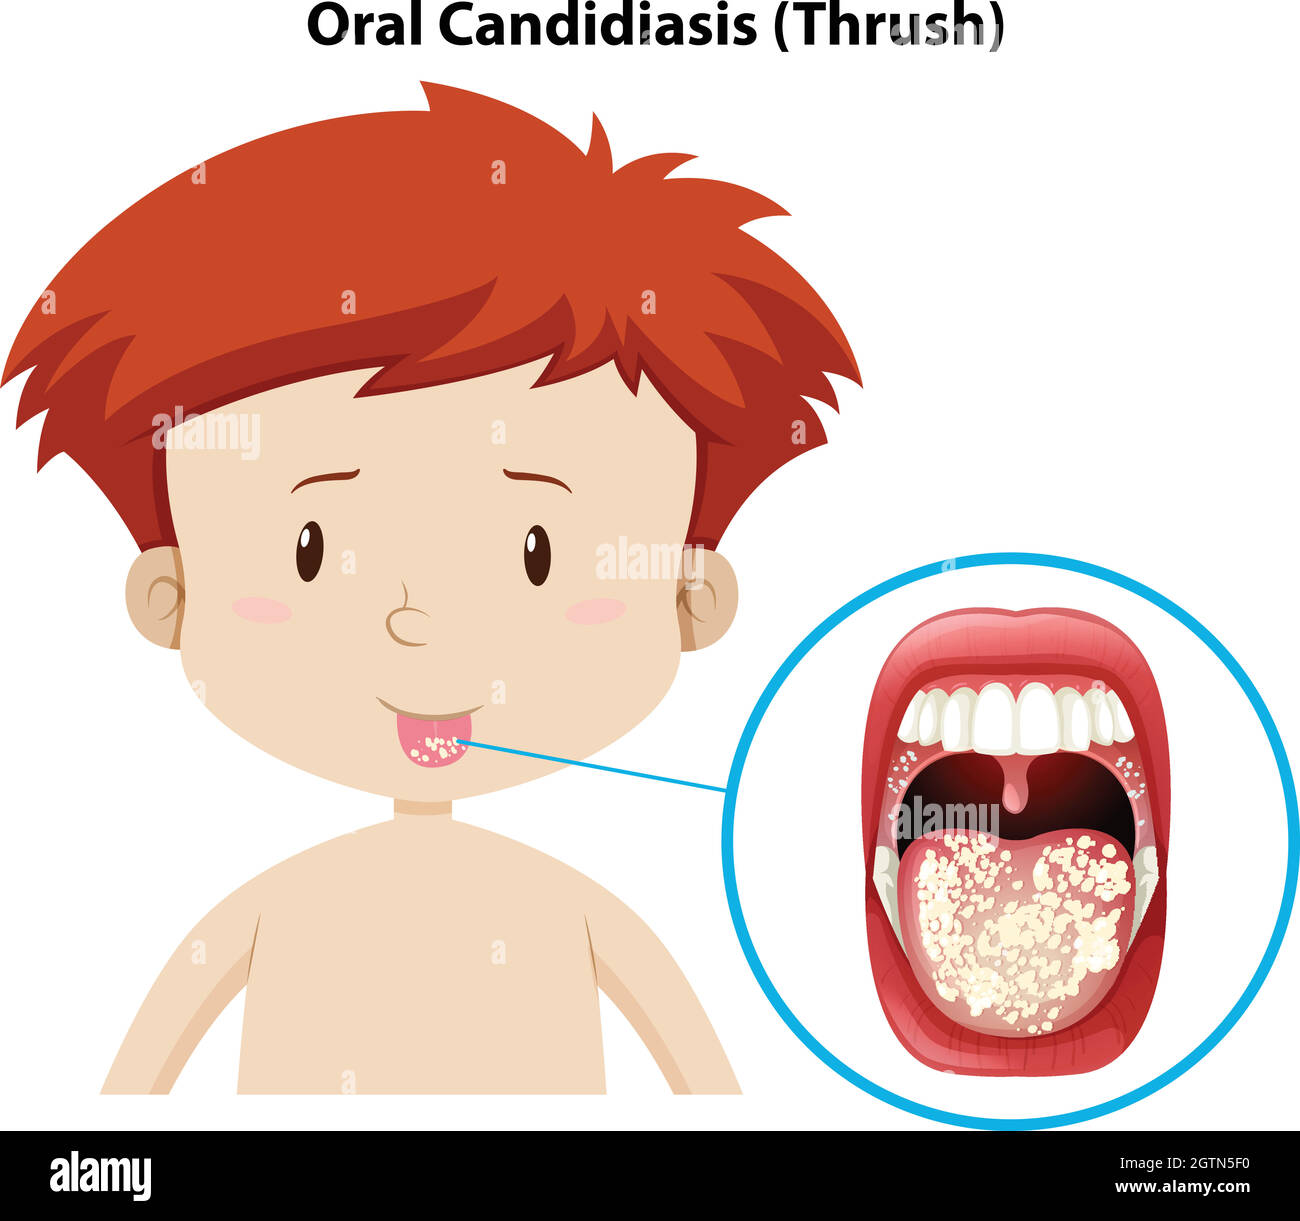 A Young Boy with Oral Candidiasis Stock Vector